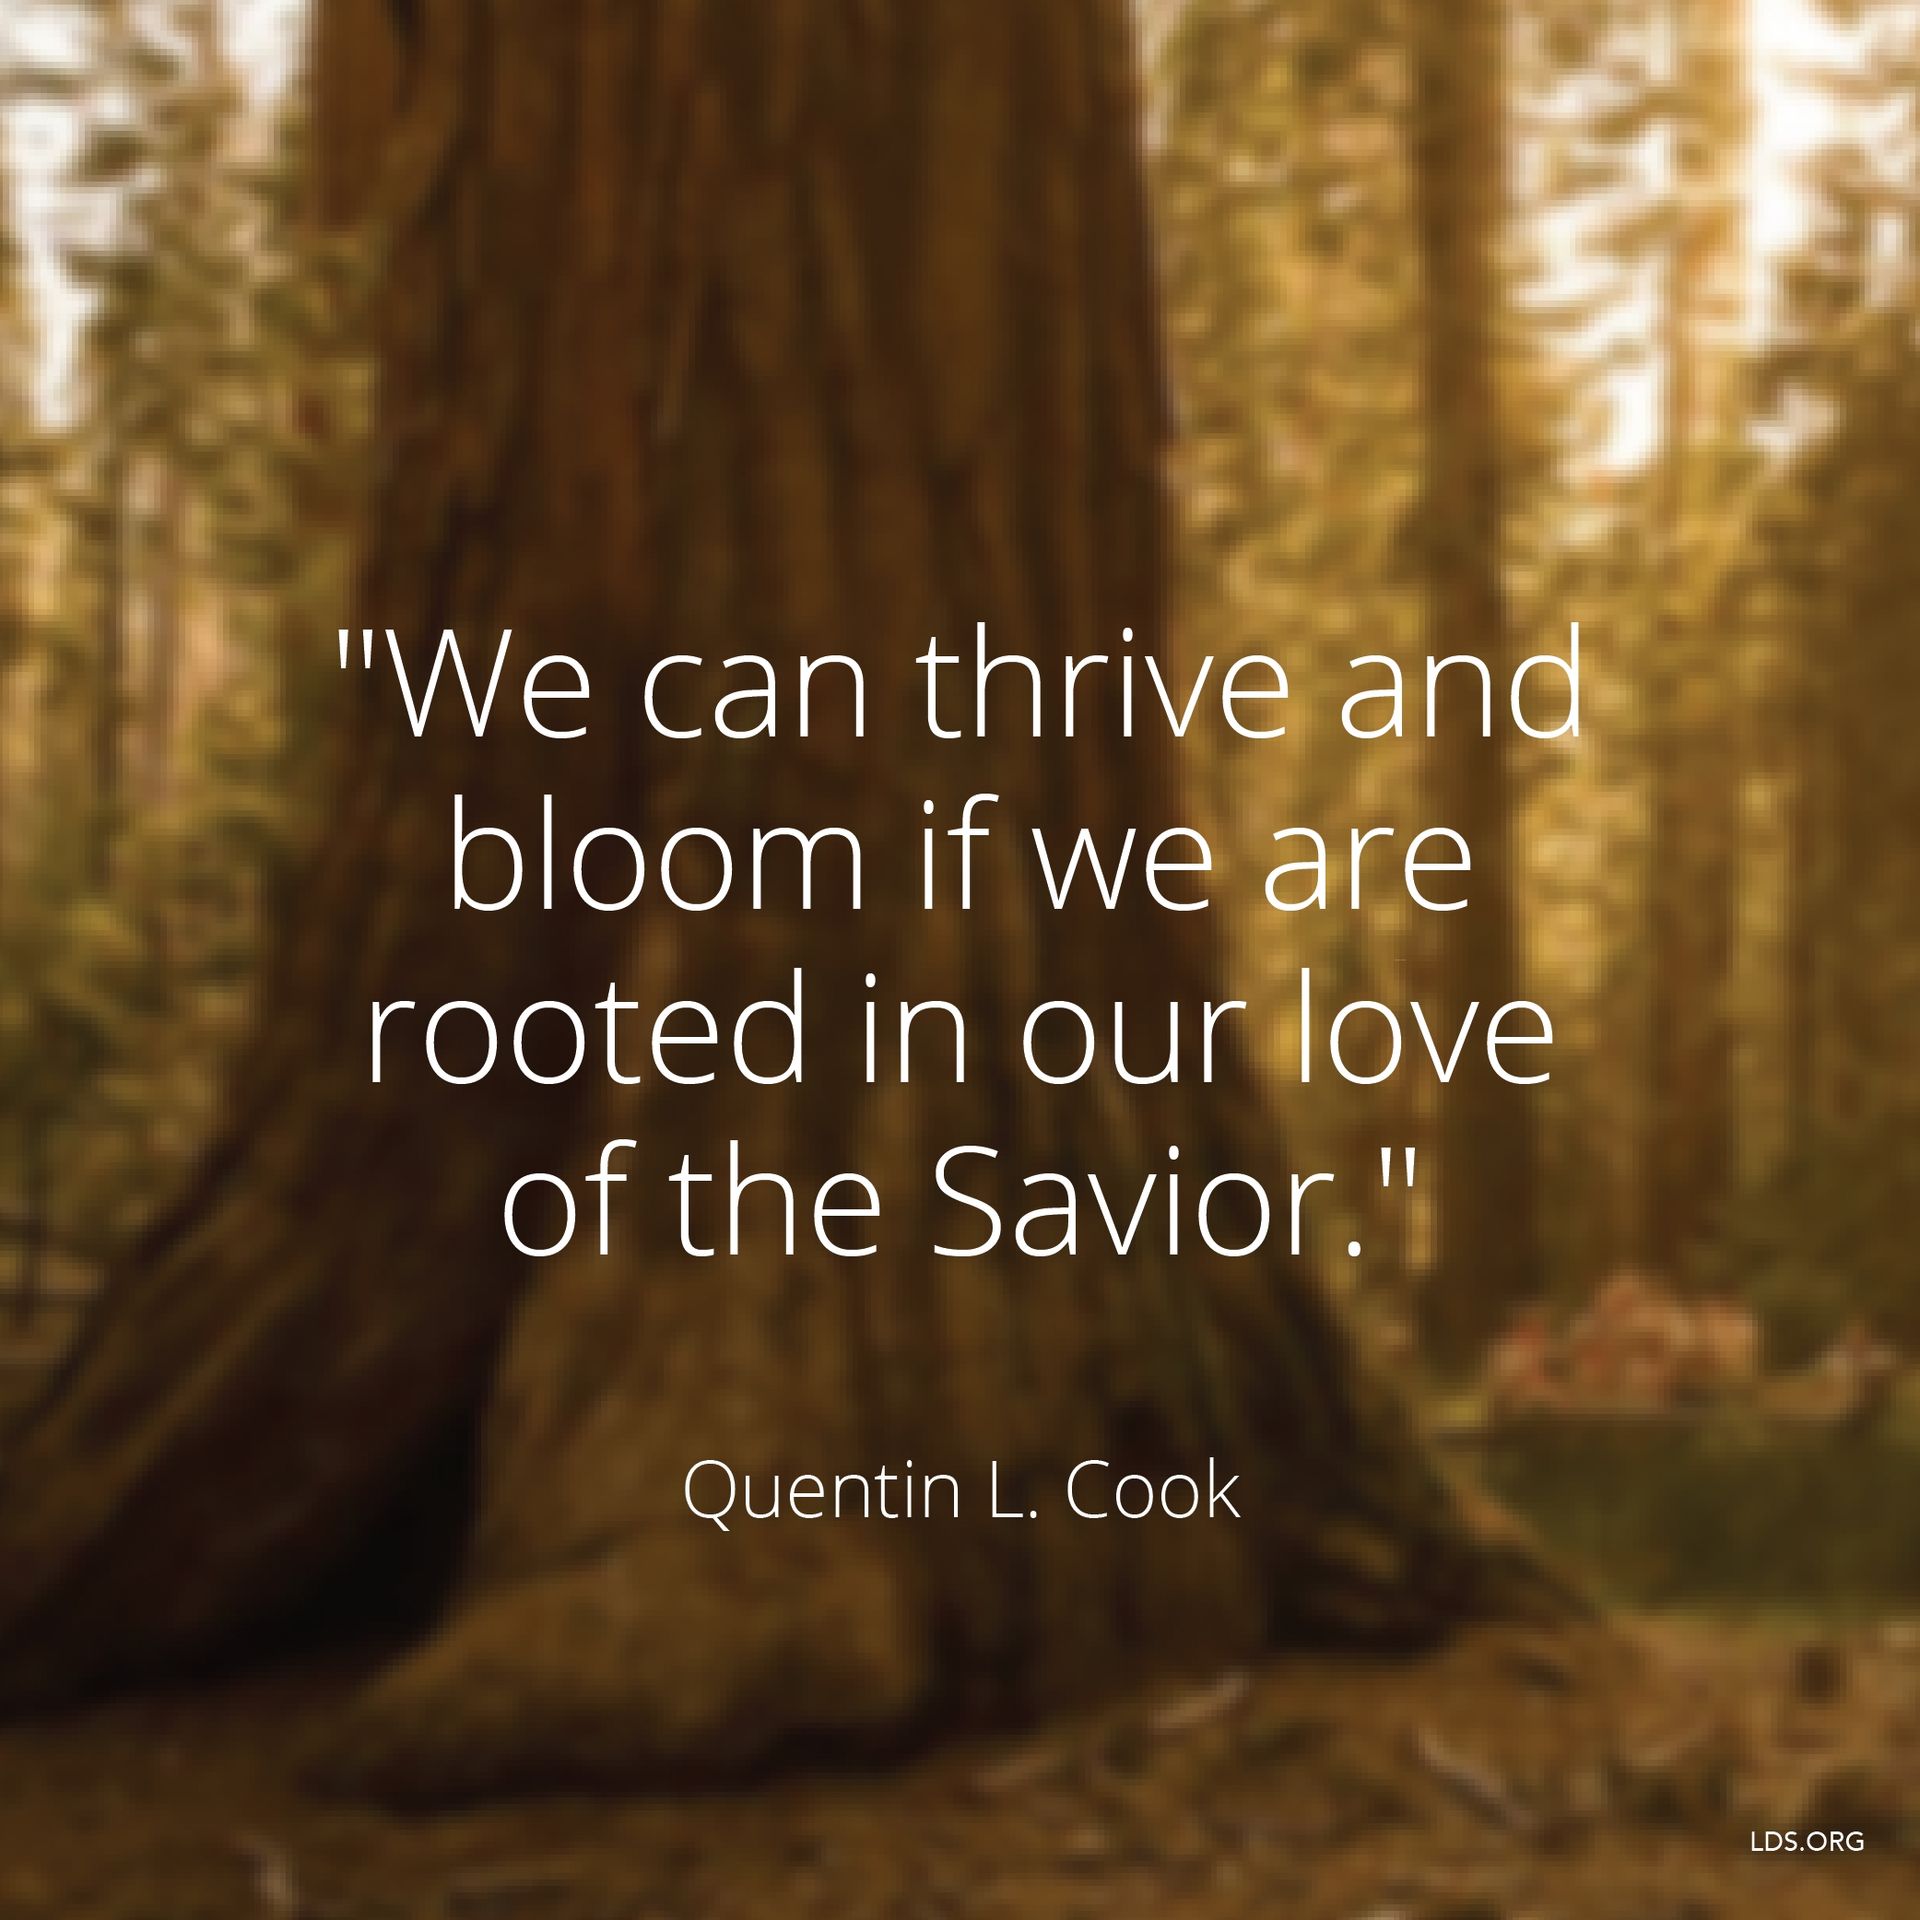 “We can thrive and bloom if we are rooted in our love of the Savior.”—Elder Quentin L. Cook, “The Lord Is My Light” © undefined ipCode 1.